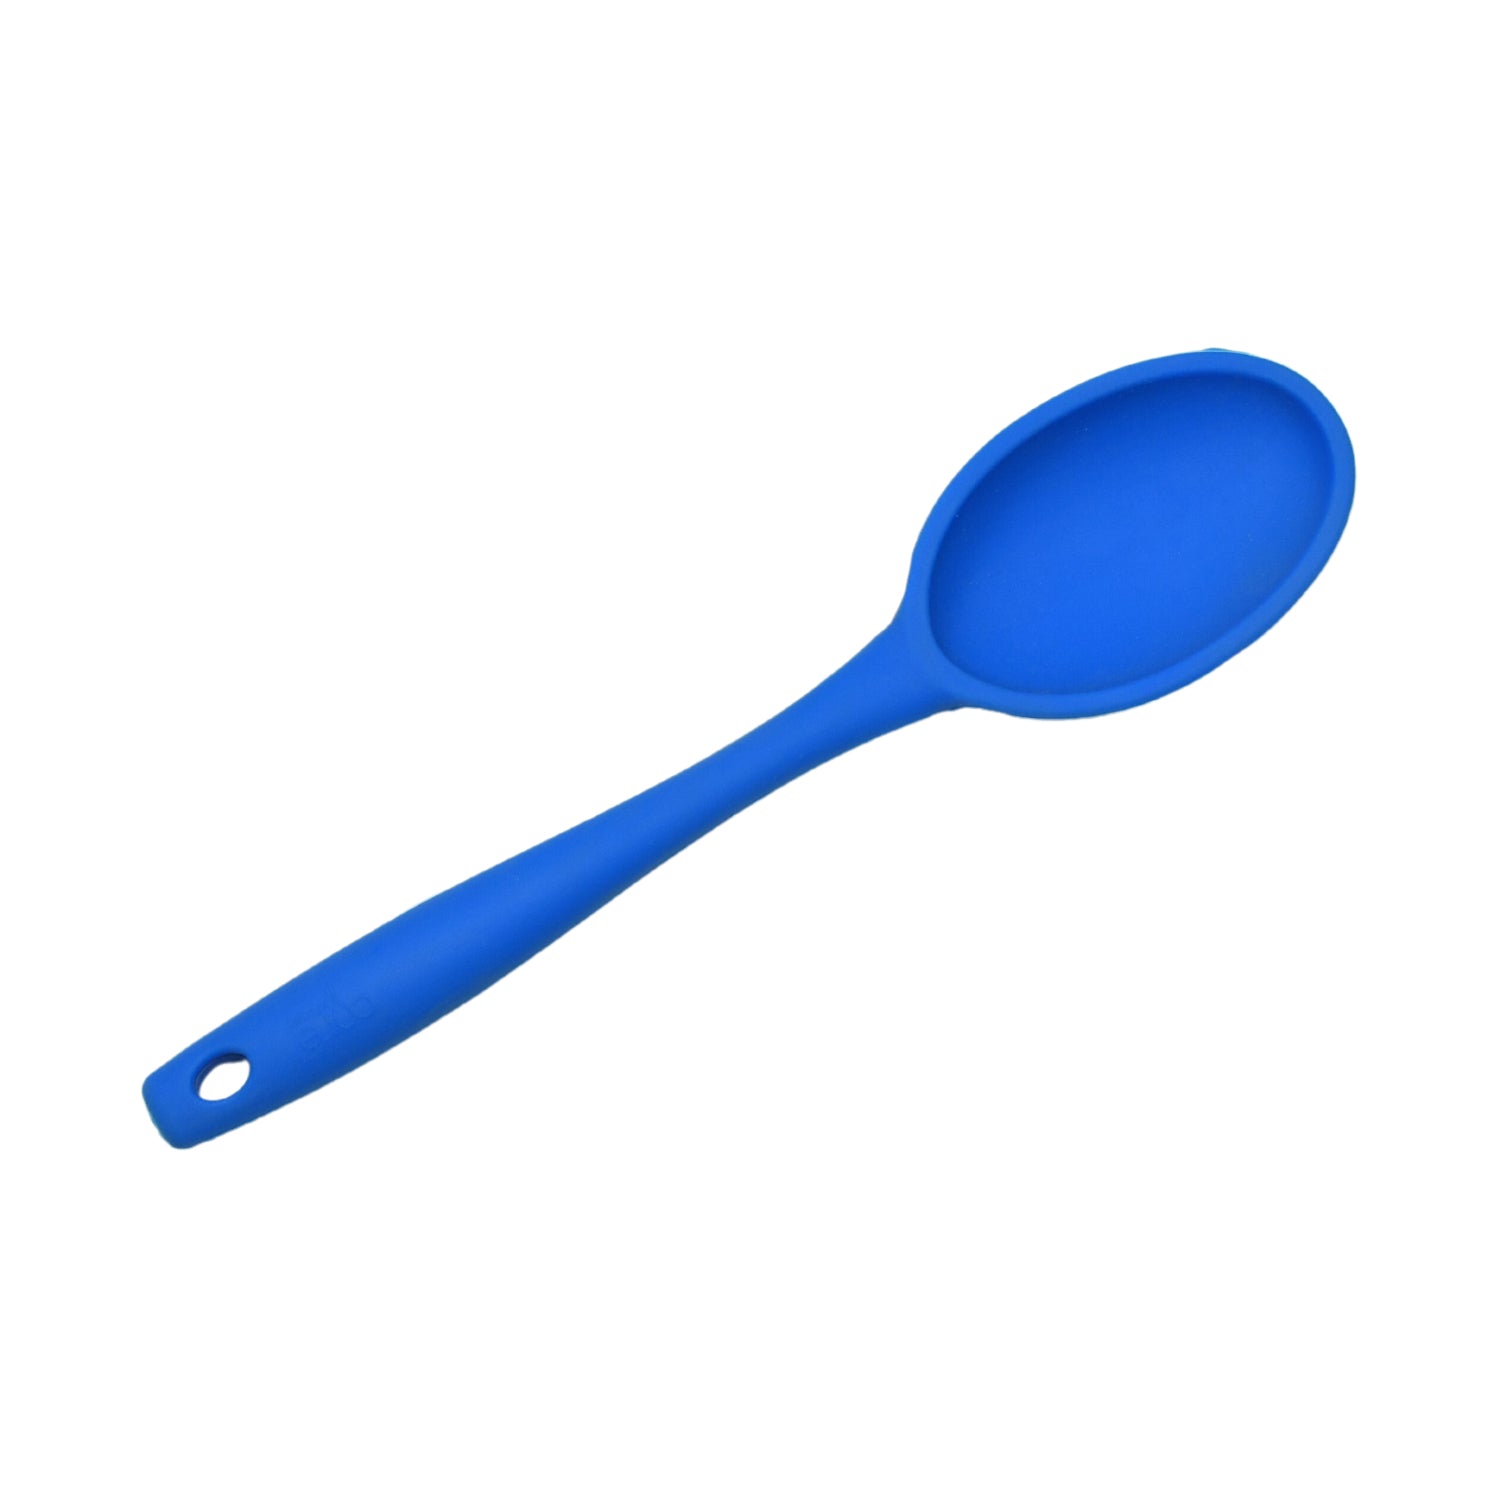 5403 Silicone Small Spoon Scoop Kitchen Utensils Tool Flatware. Dukandaily